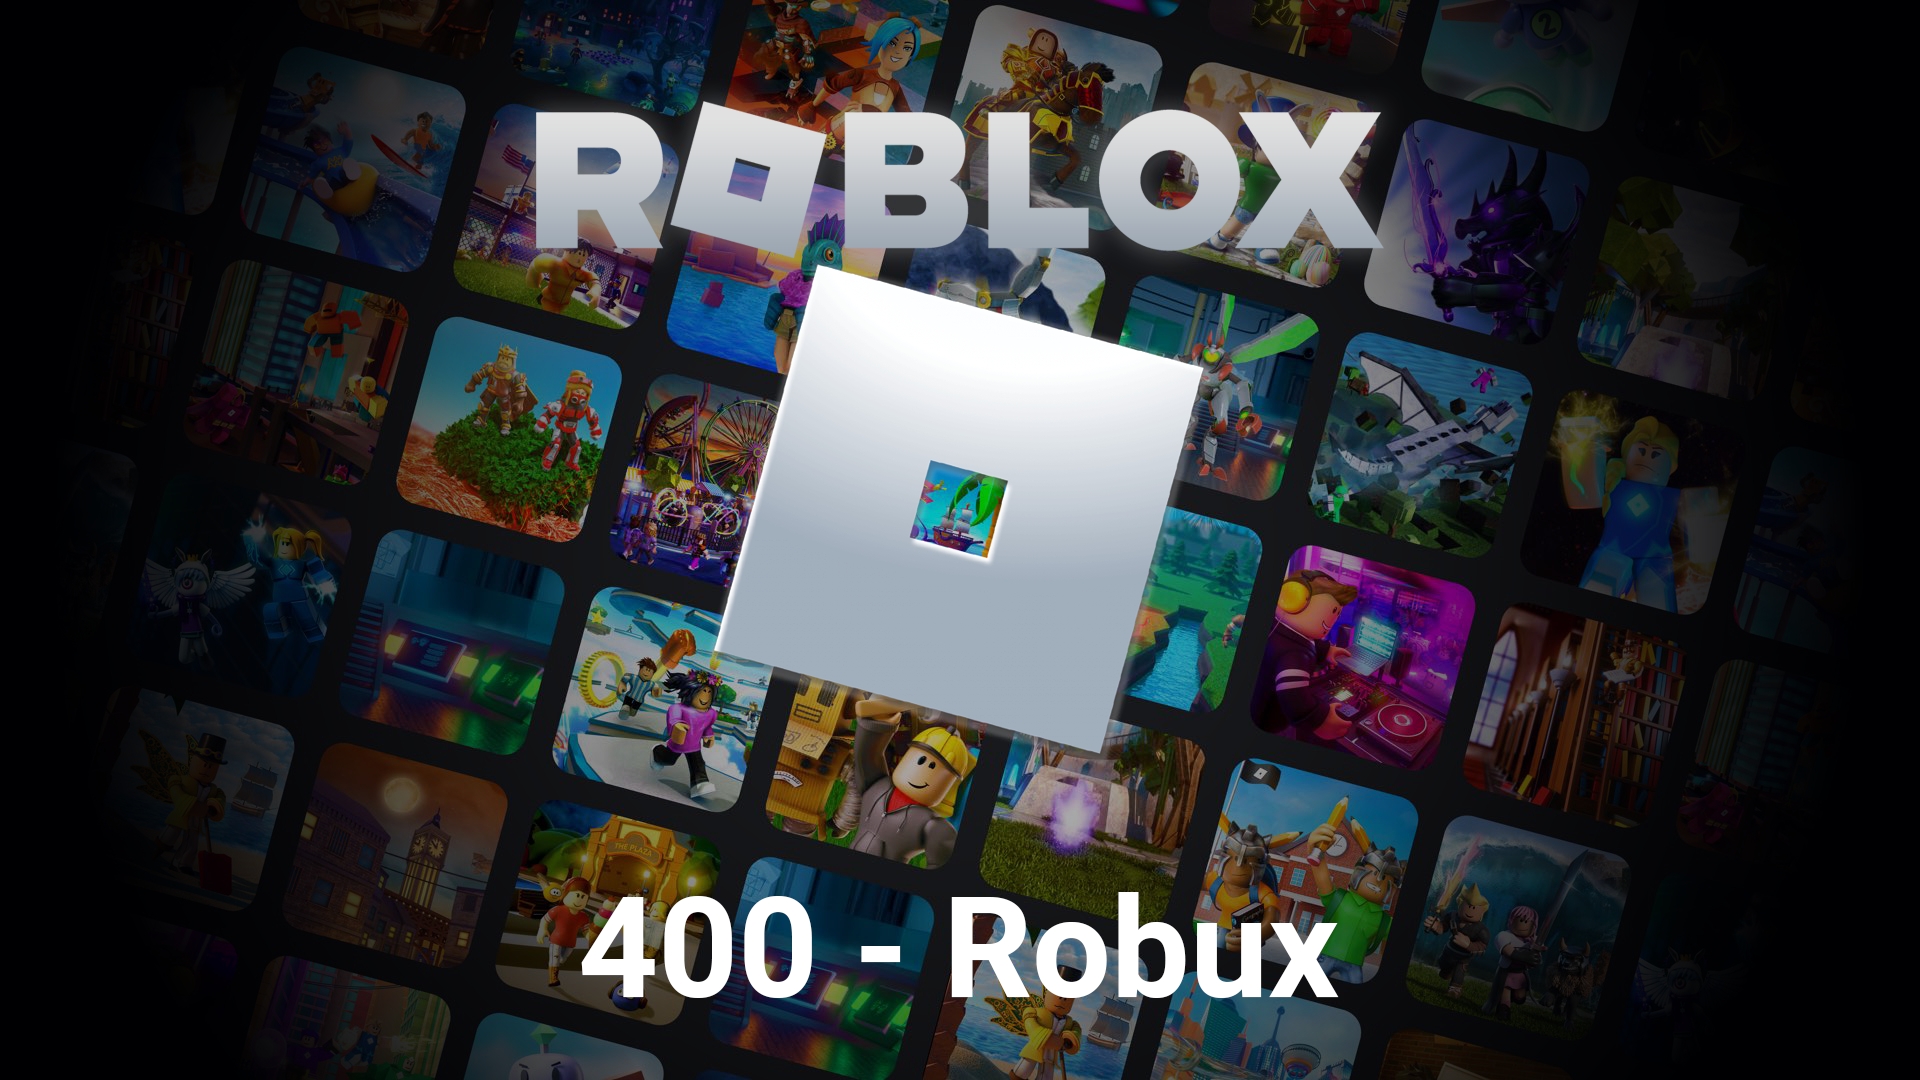 Robux Gift Card Singapore